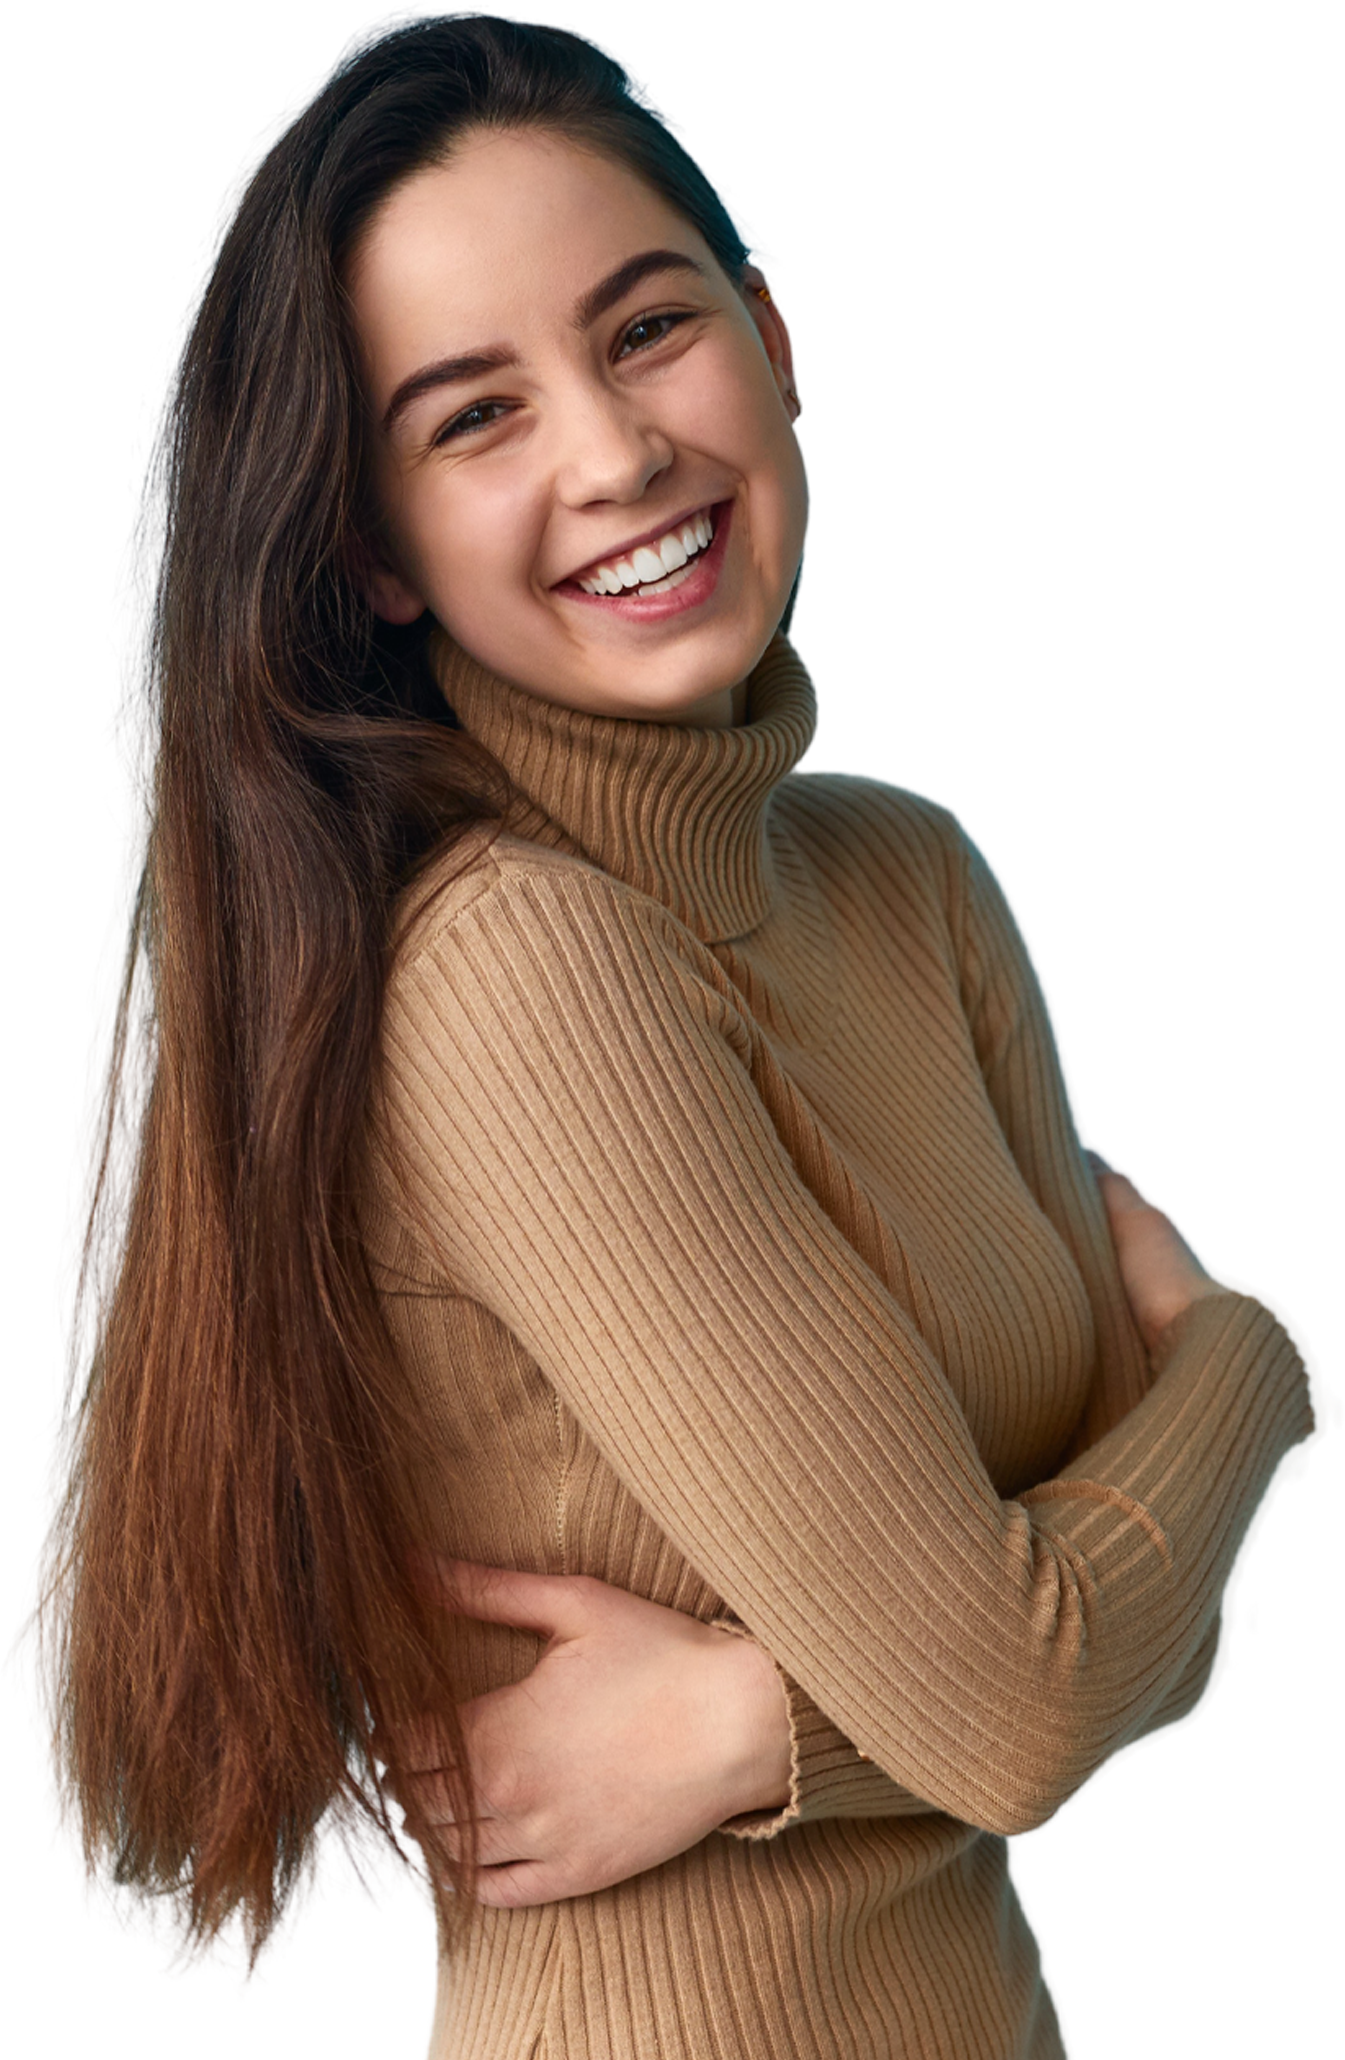 Girl with long hair, she is showing her smile after wearing her retainer.